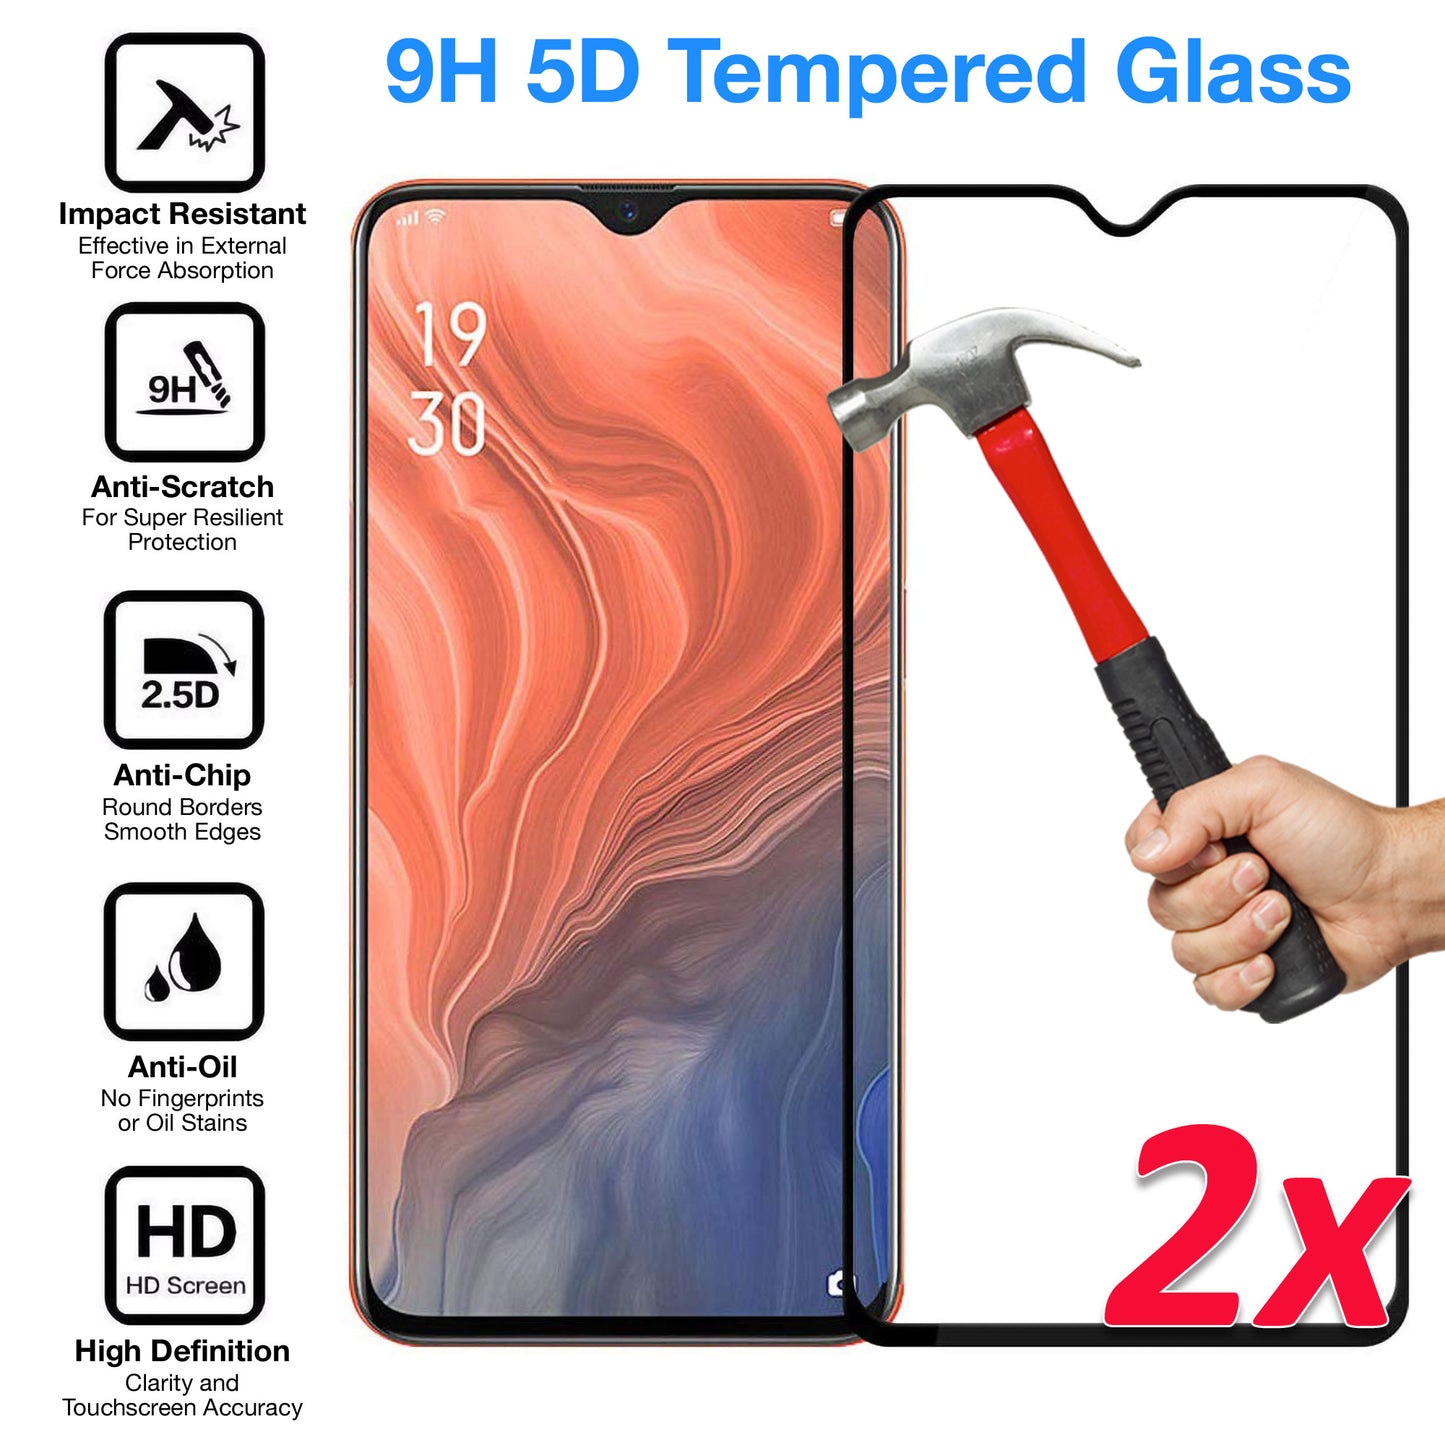 [2 Pack] MEZON Full Coverage Vivo Y21 Tempered Glass Crystal Clear Premium 9H HD Screen Protector (Vivo Y21, 9H Full)